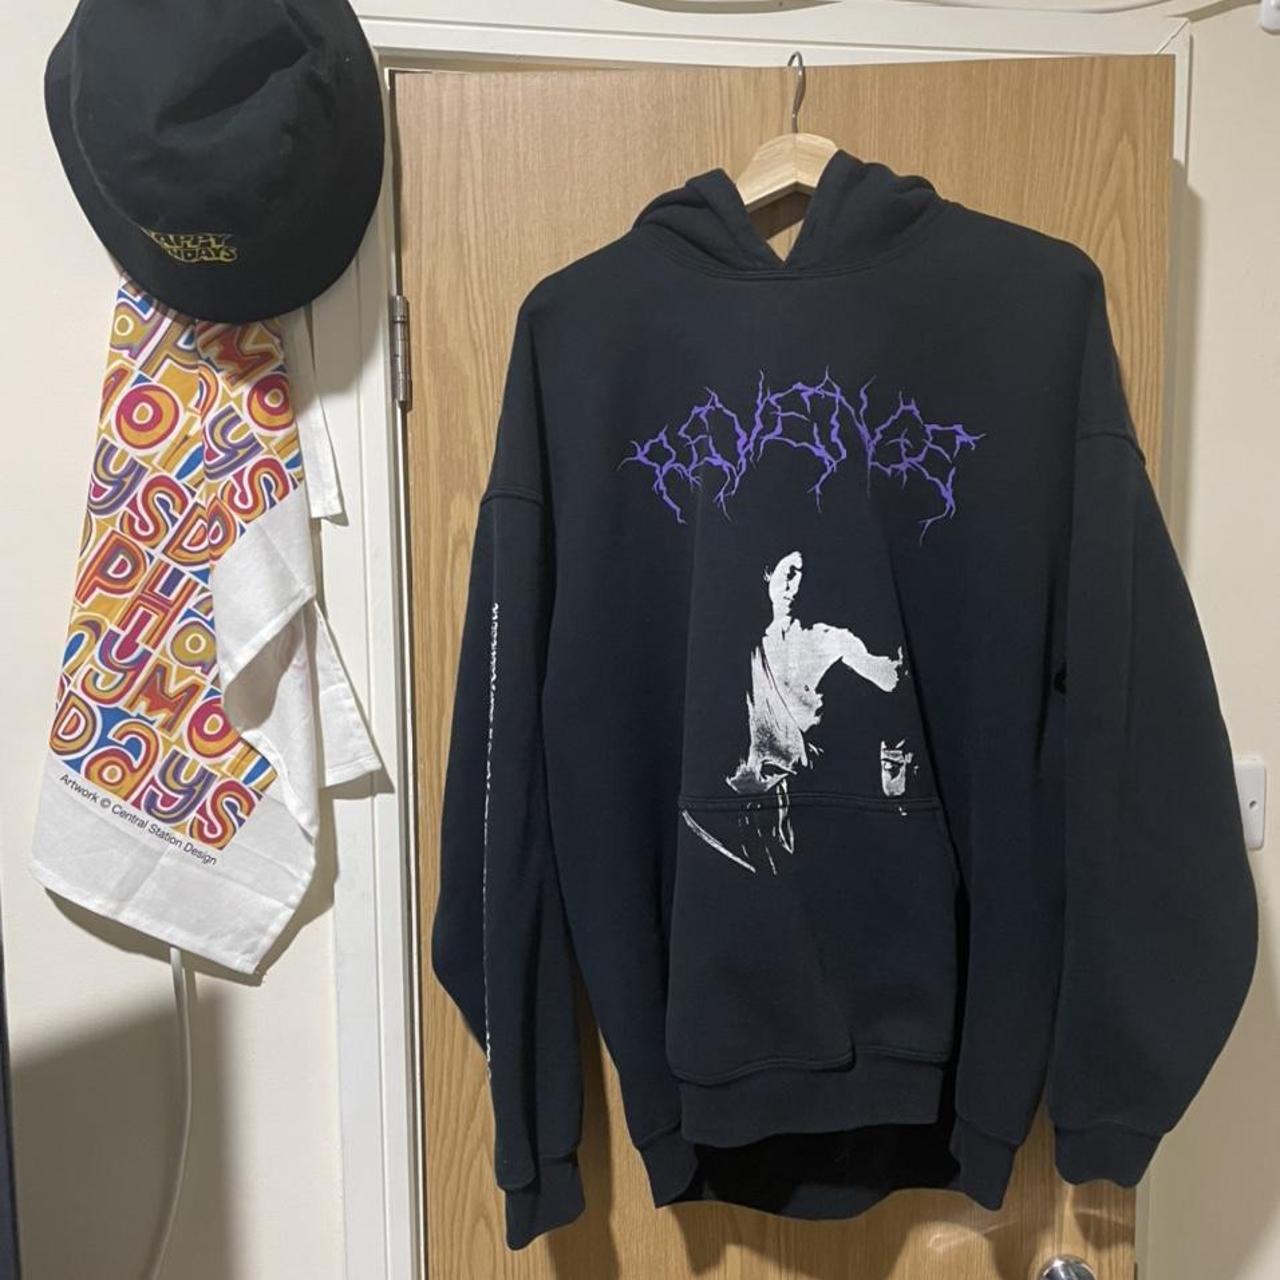 Super rare David and Goliath / Anarchy hoodie from... - Depop